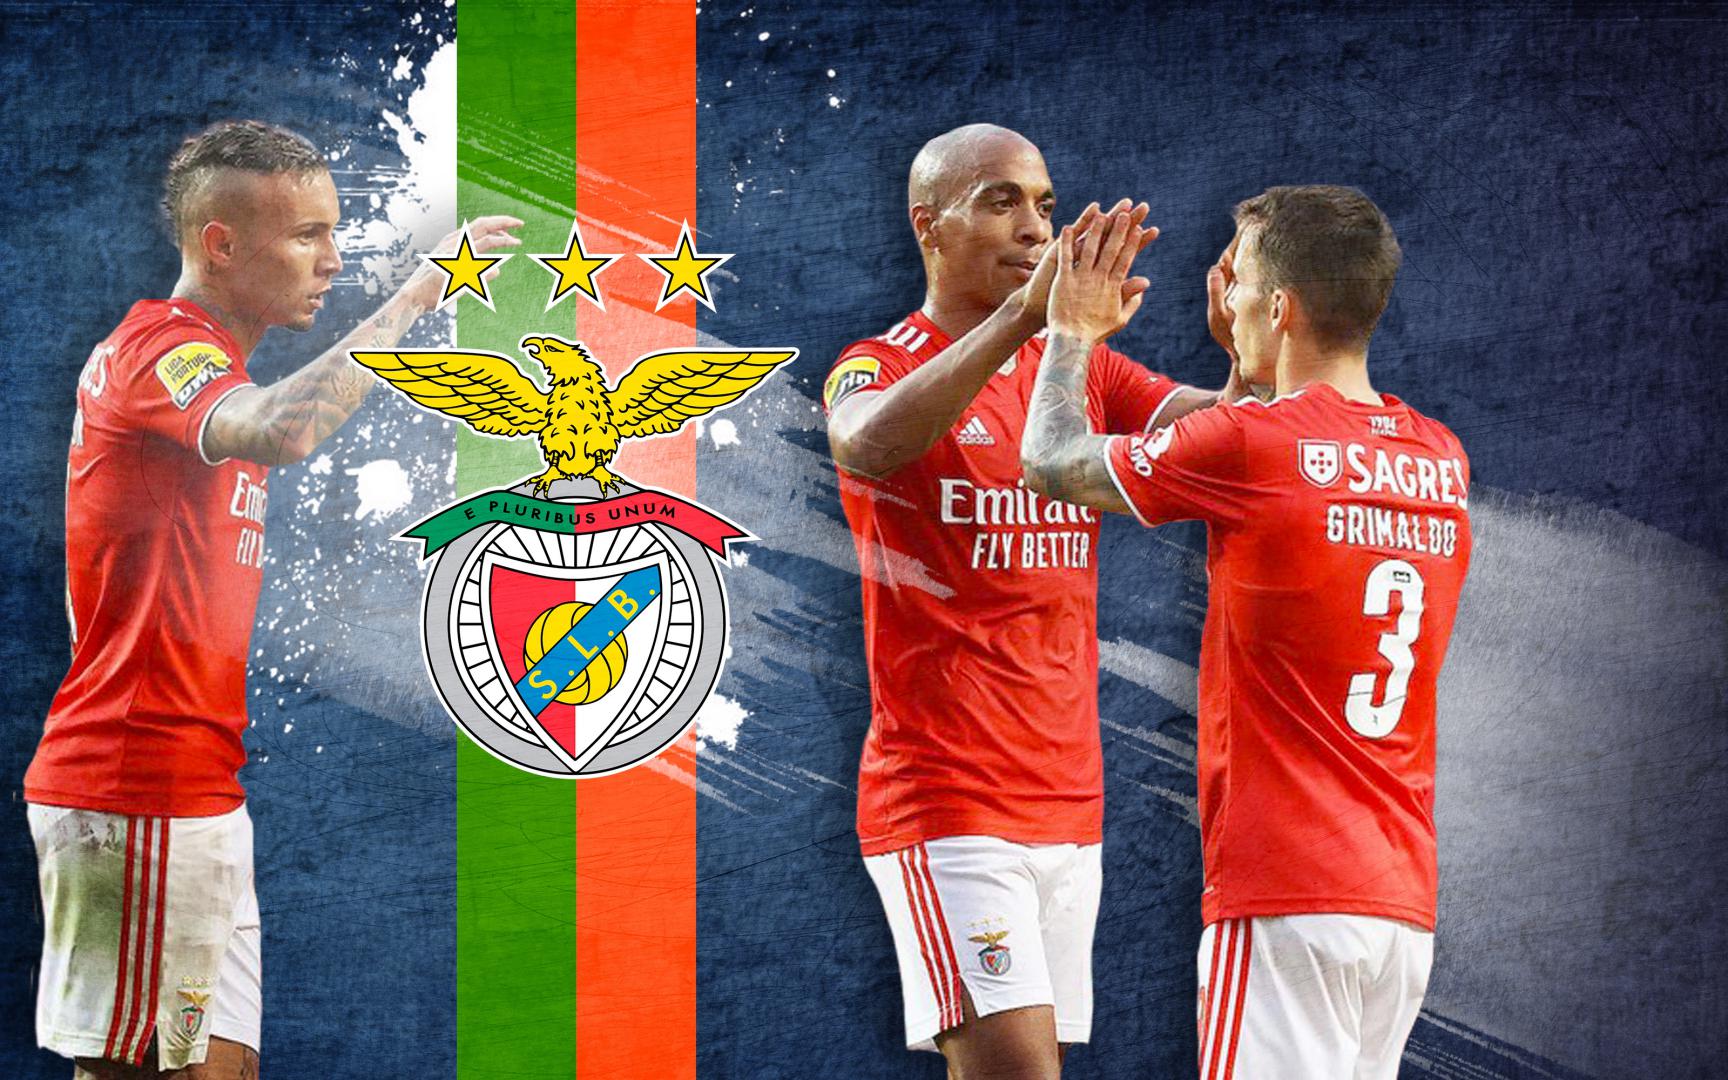 The lowdown on Benfica